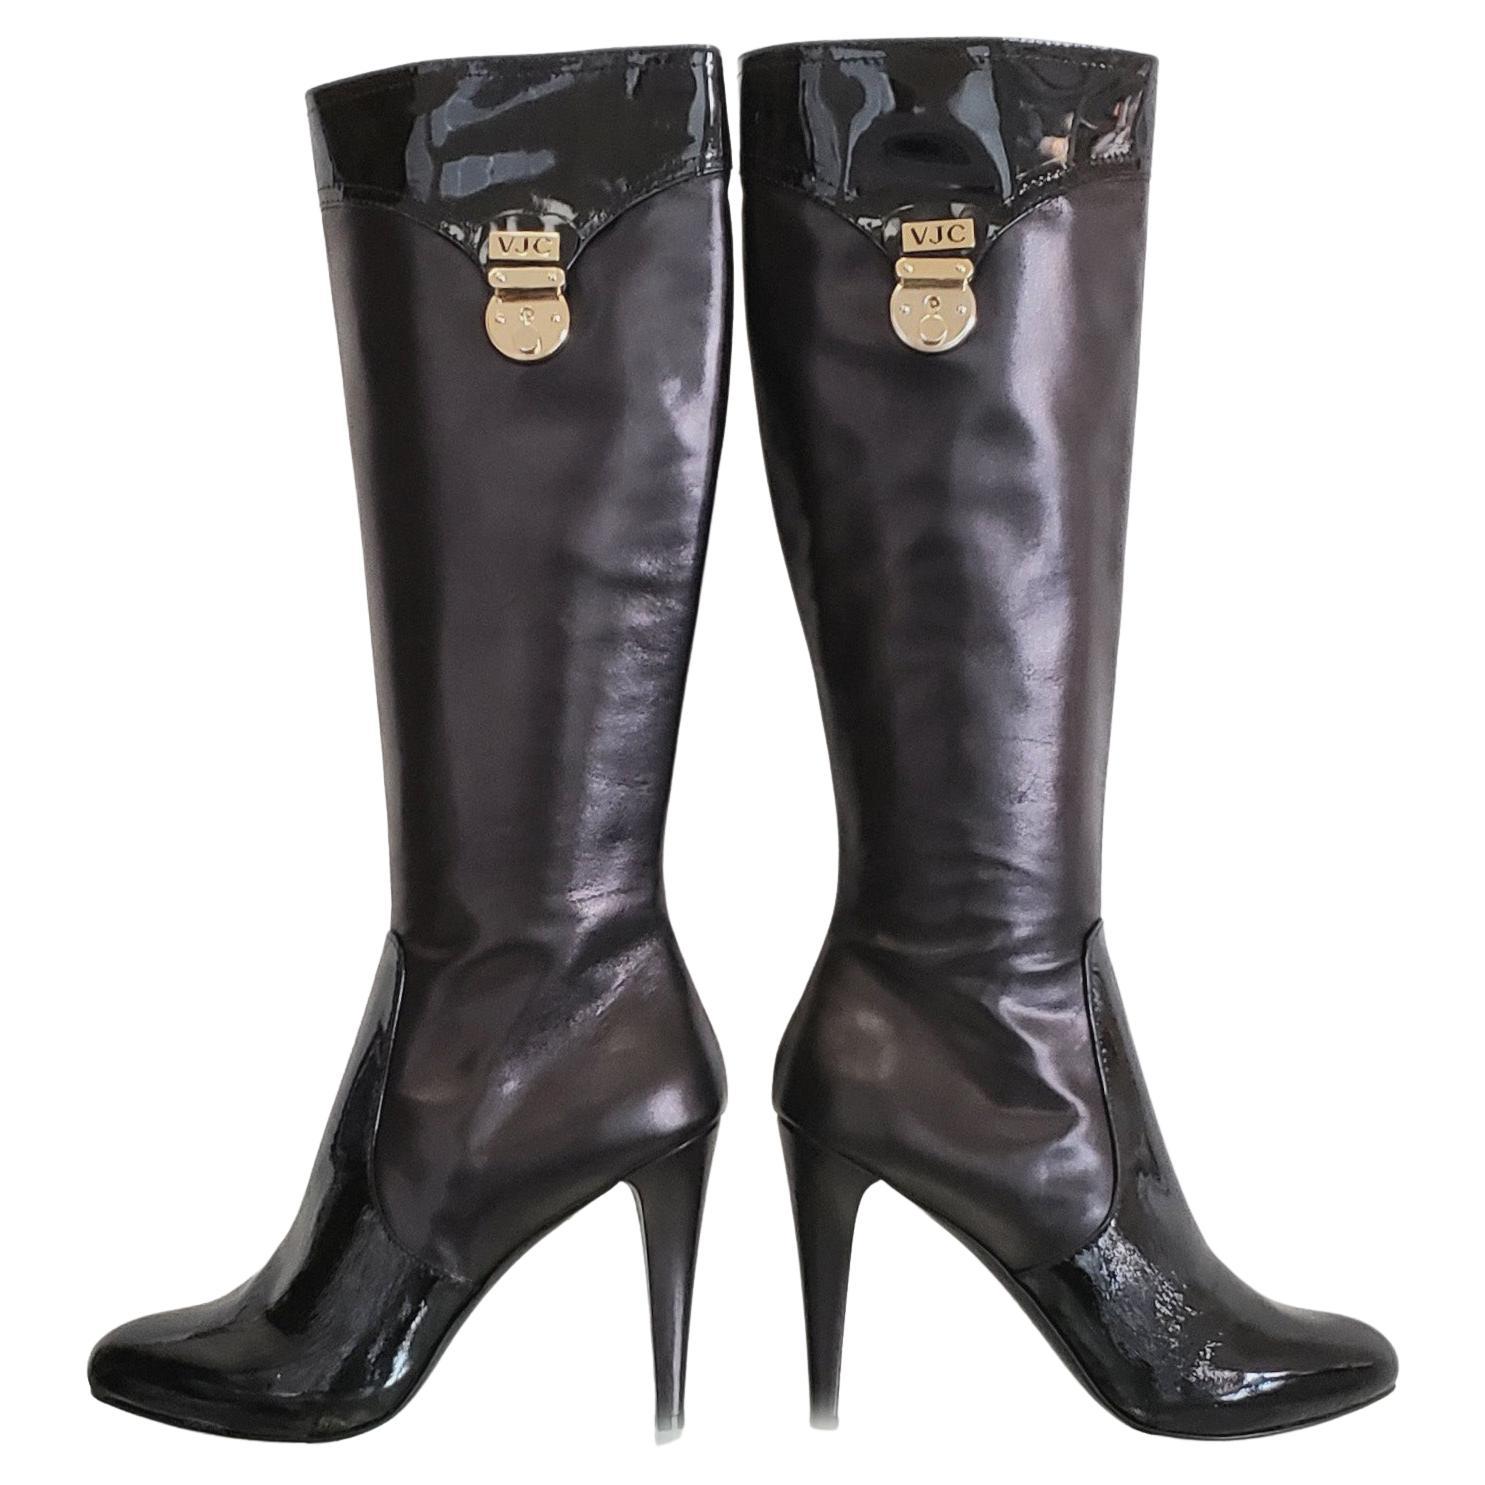 NEW VERSACE VJC BLACK LEATHER BOOTS with PATENT LEATHER INSERTS  39 - 9 For Sale